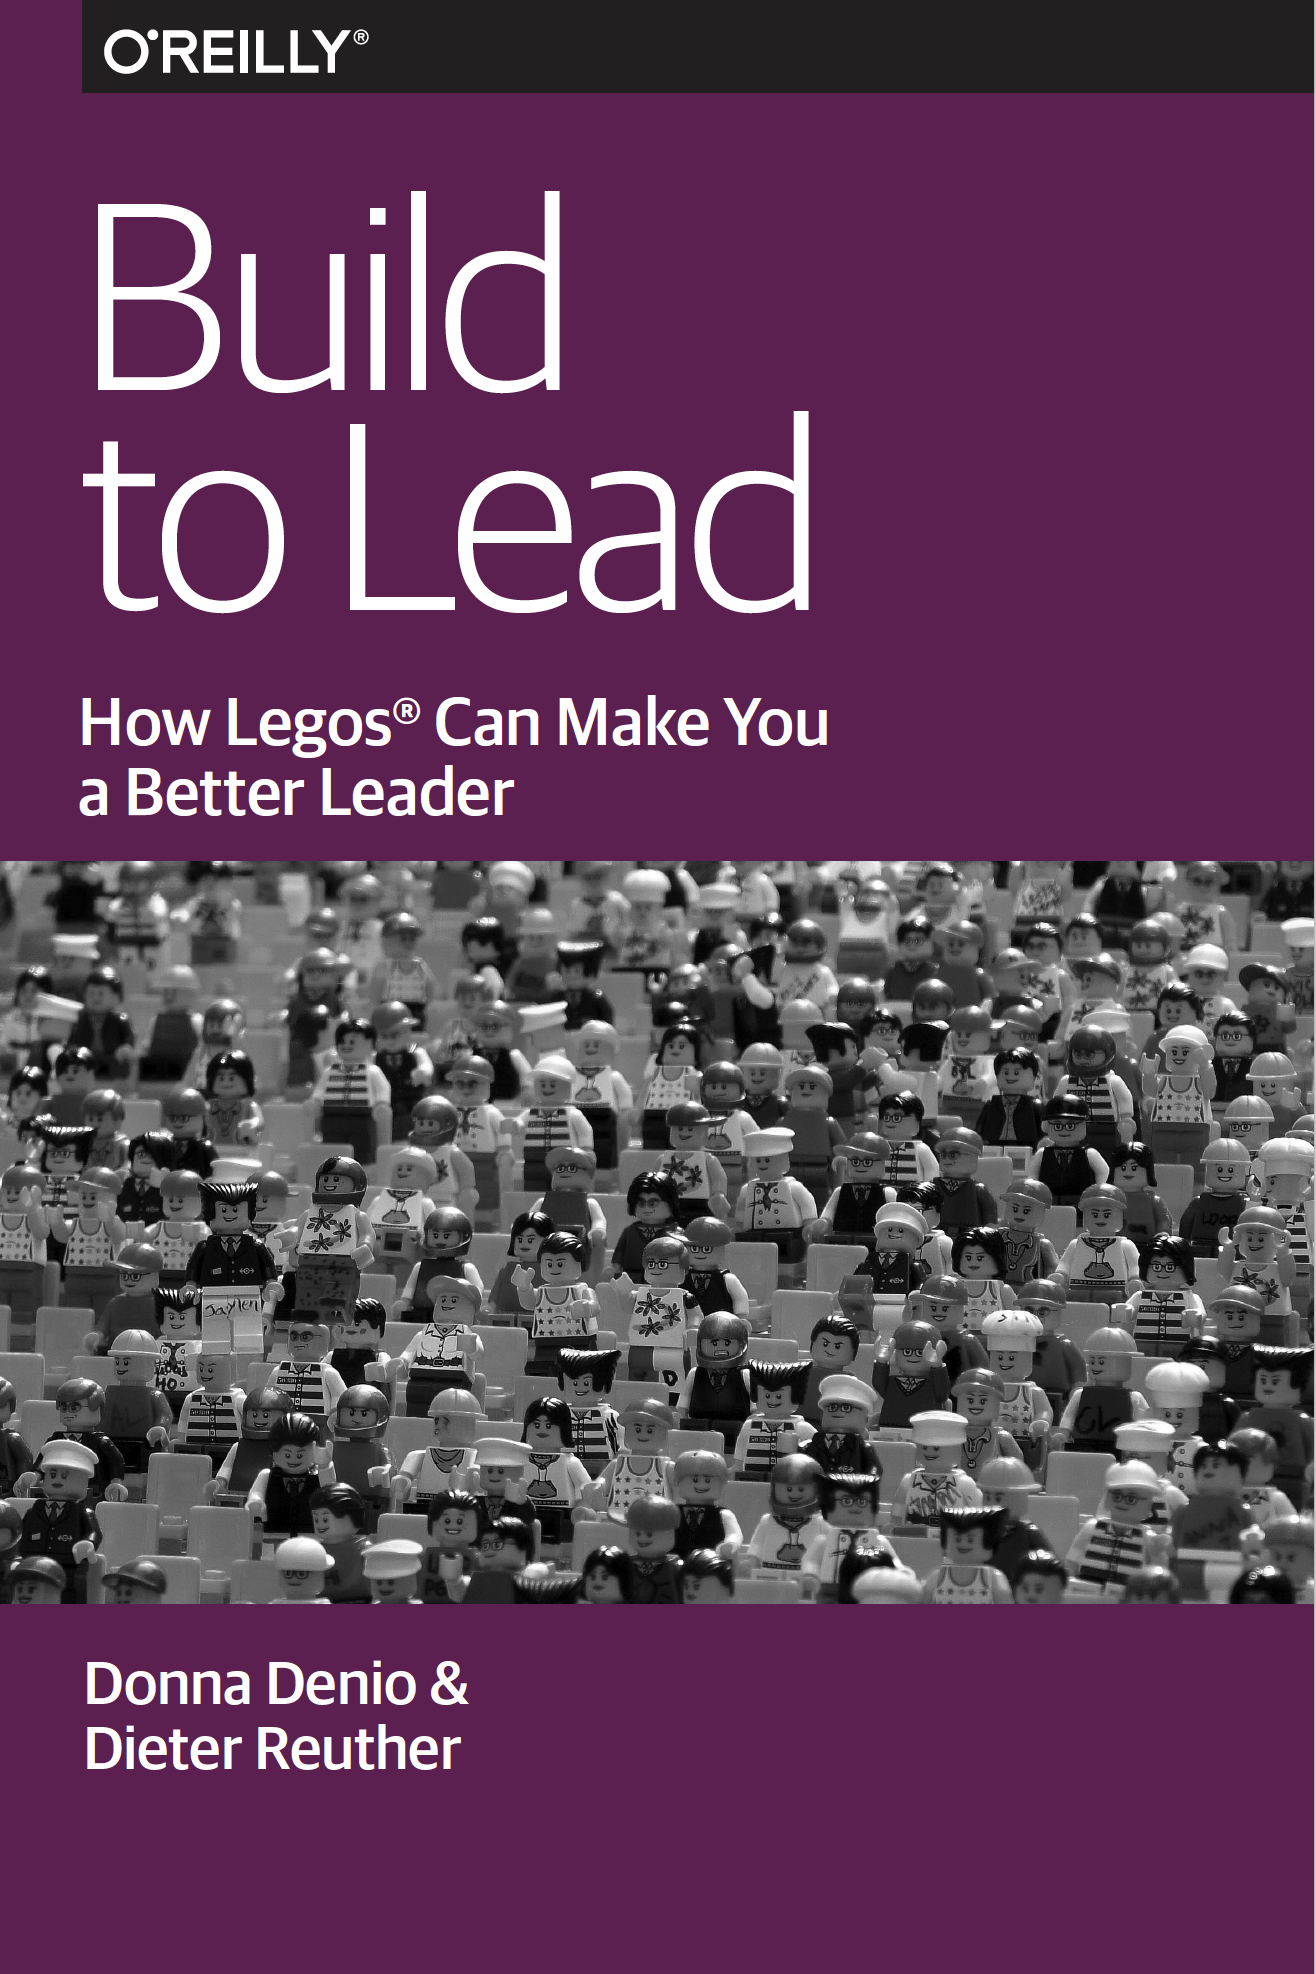 Build to Lead: How Lego bricks can make you a better leader , 2016 by Donna Denio, Dieter Reuther